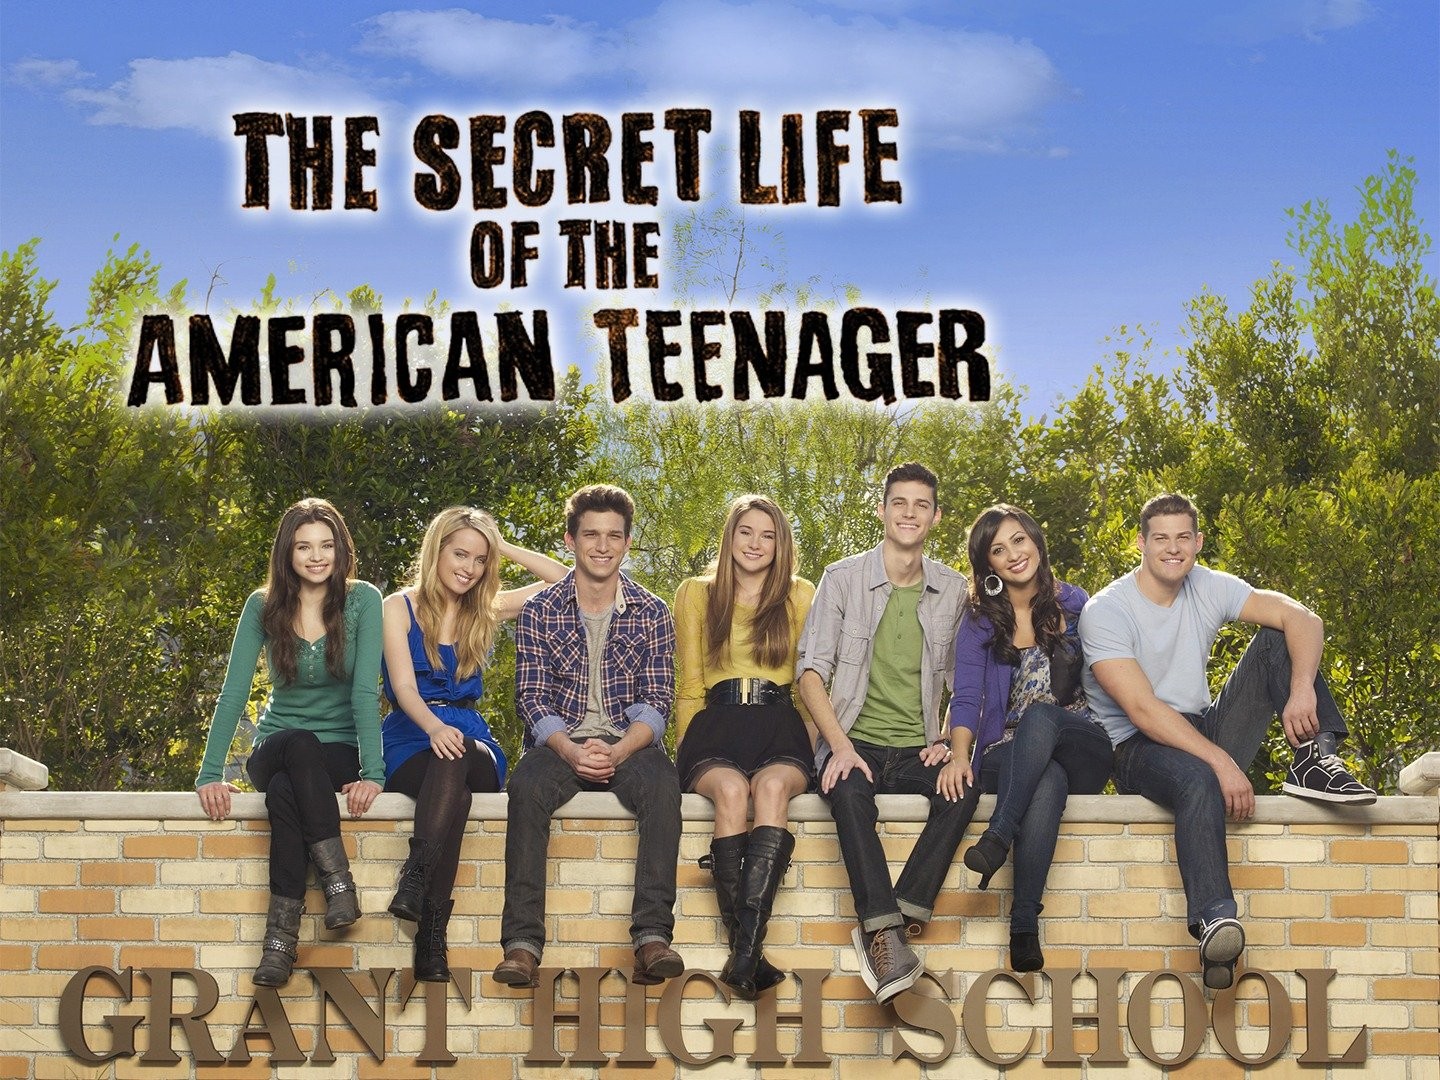 The Secret Life of the American Teenager - The TRUTH About Motherhood